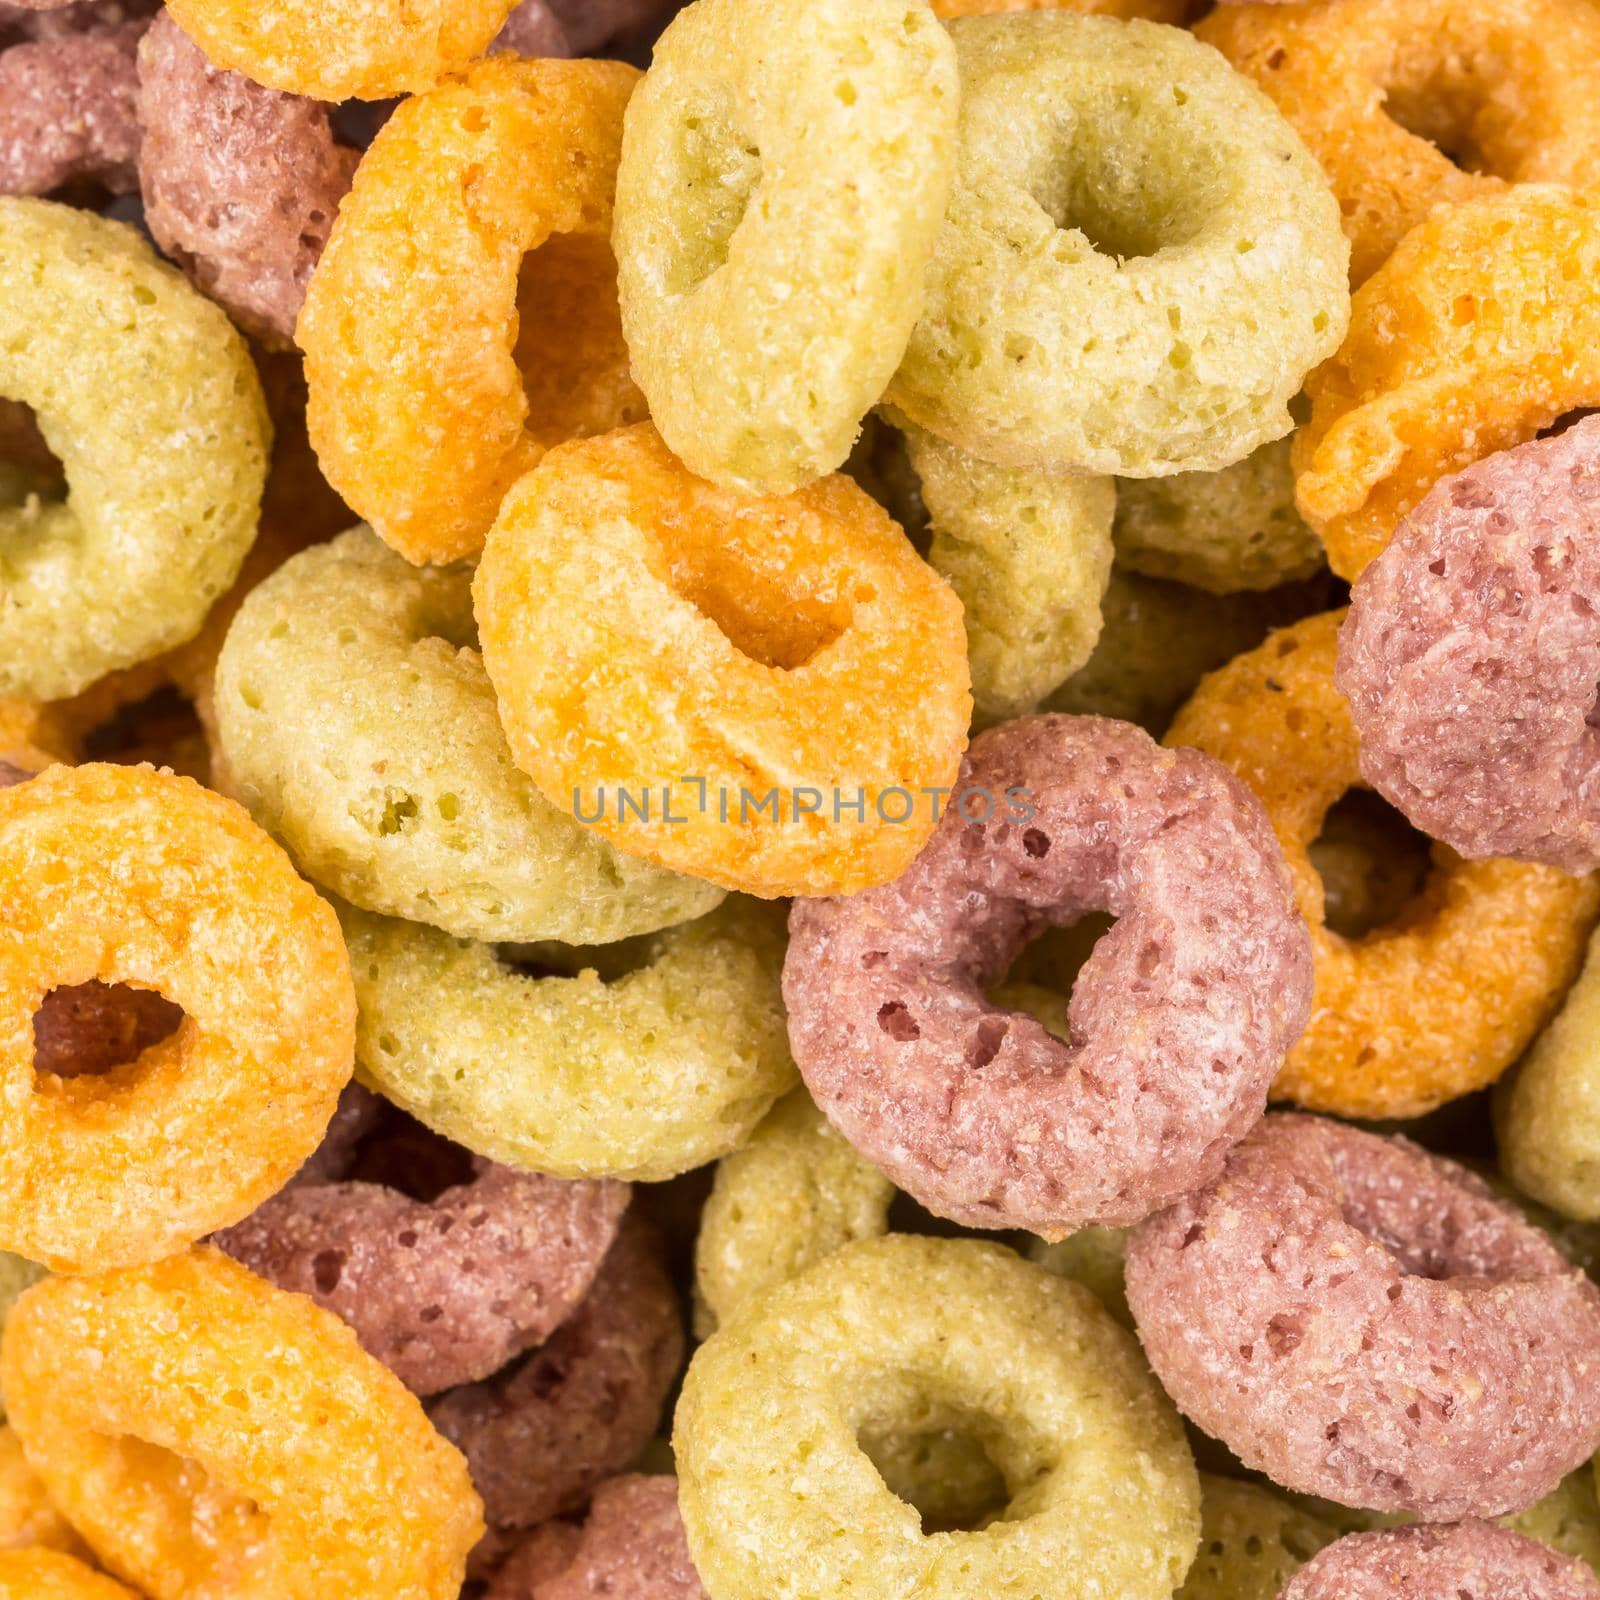 Close up image of colorful cereal against white background